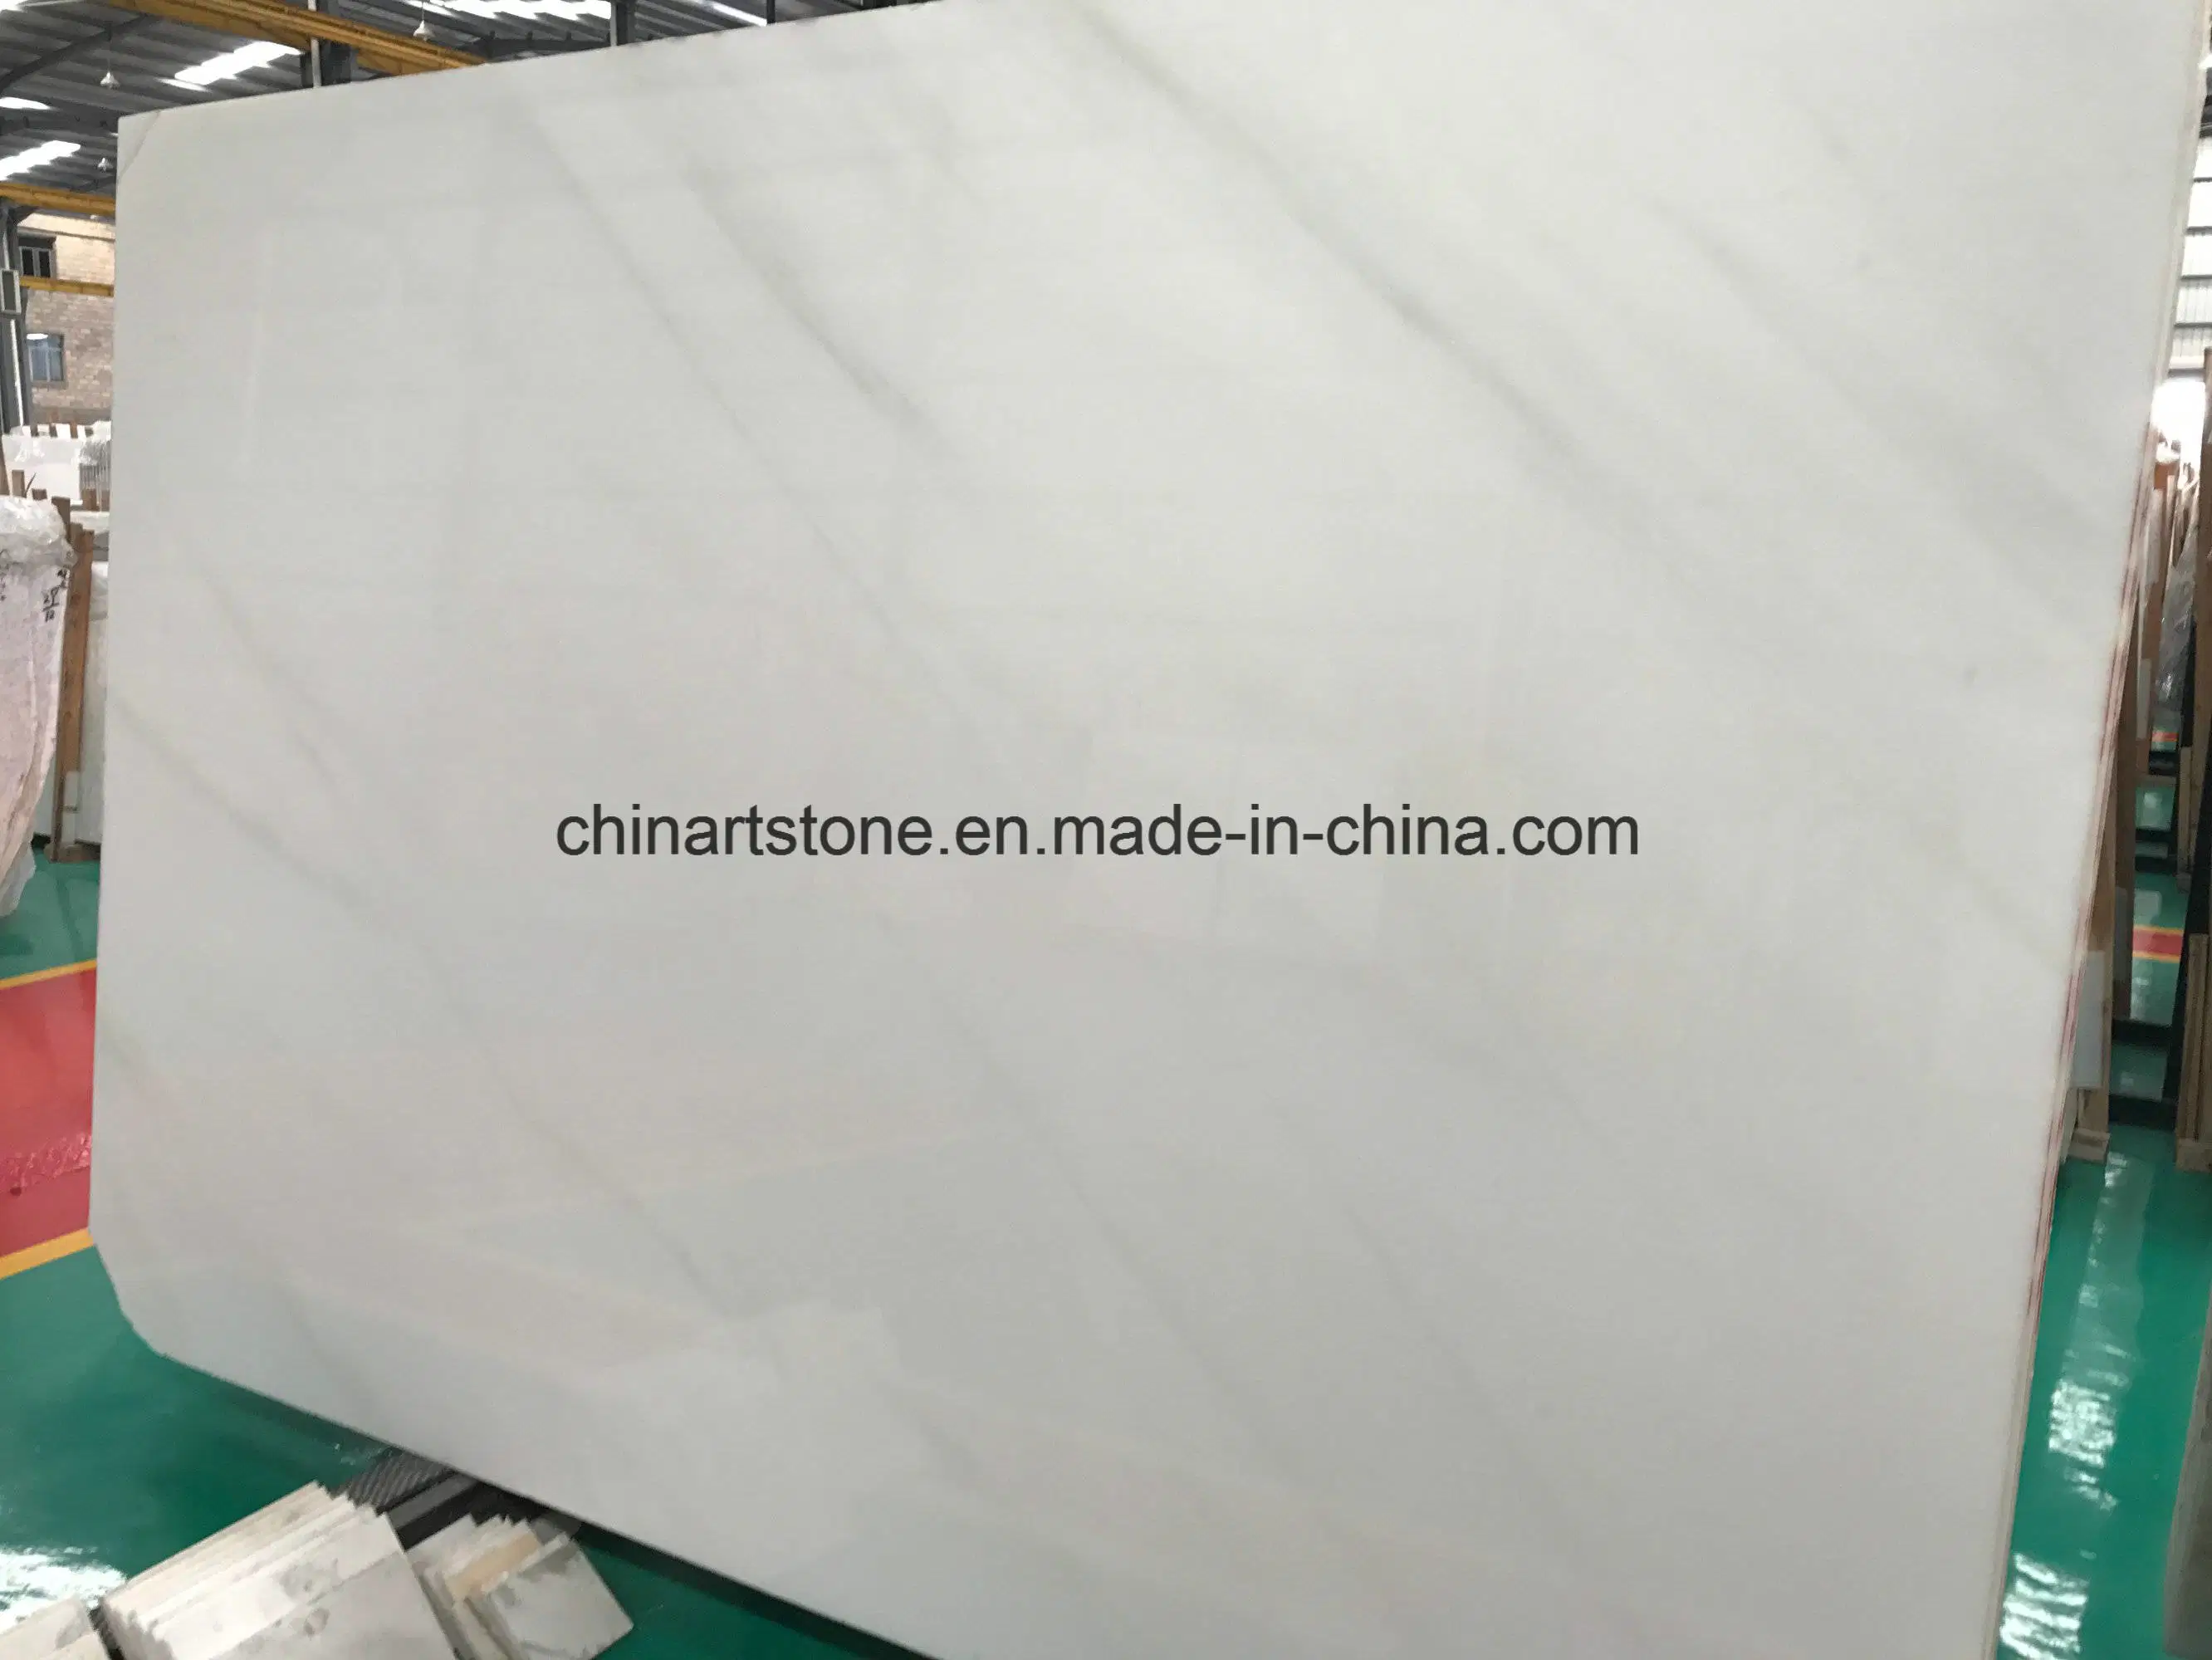 Chinese White Onxy Marble Slab for Wall Tiles